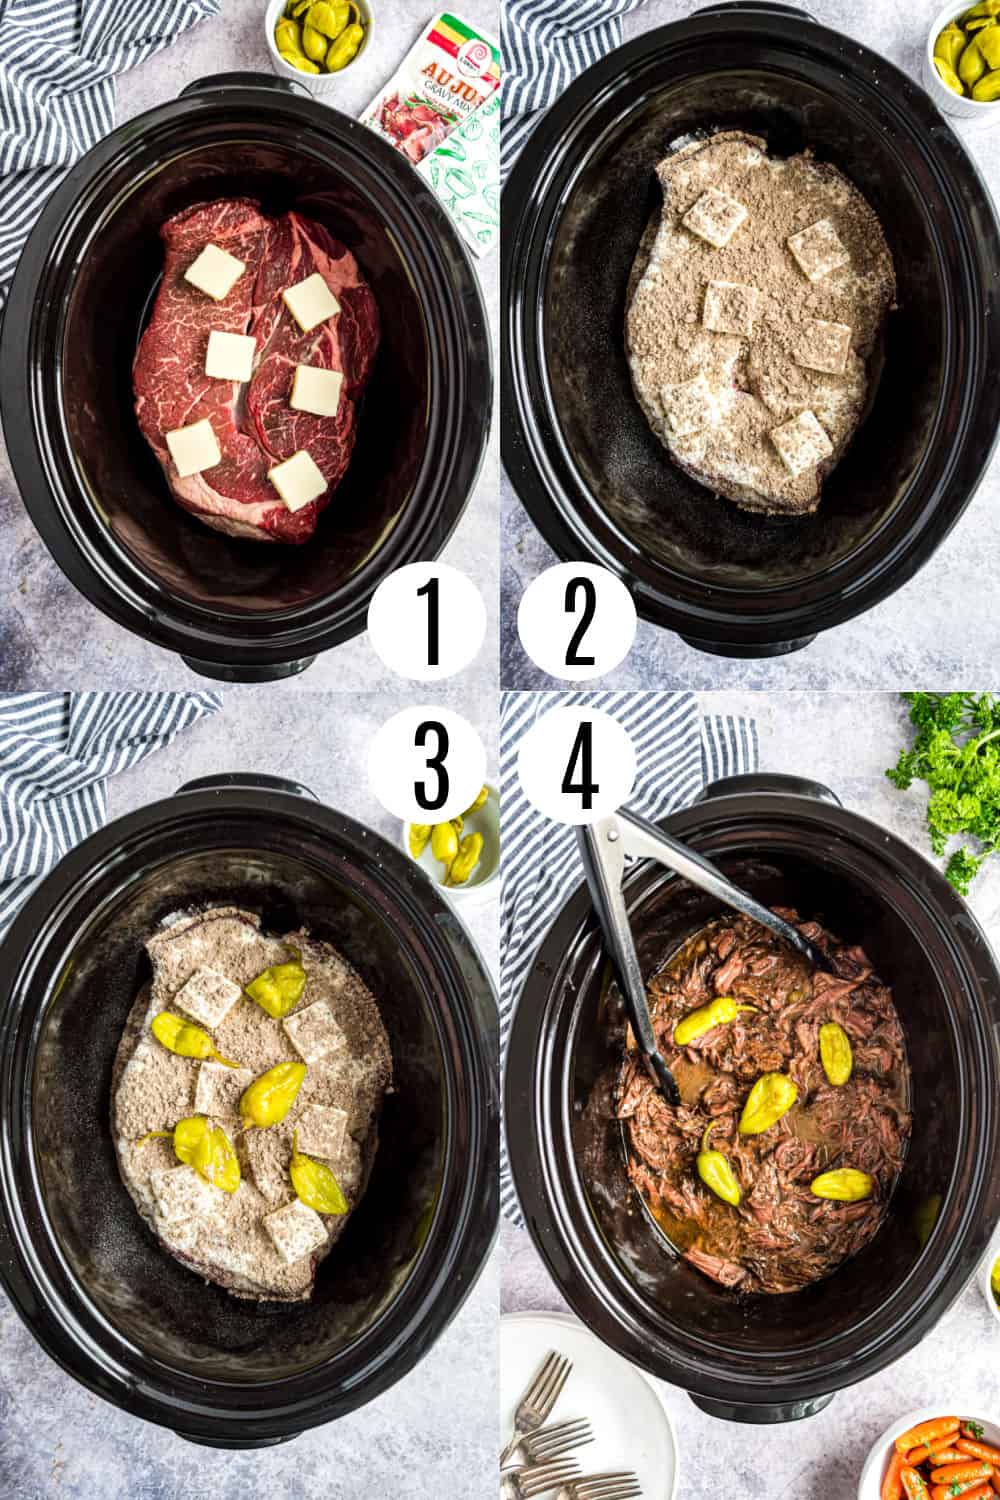 Step by step photos showing how to made slow cooker mississippi pot roast.